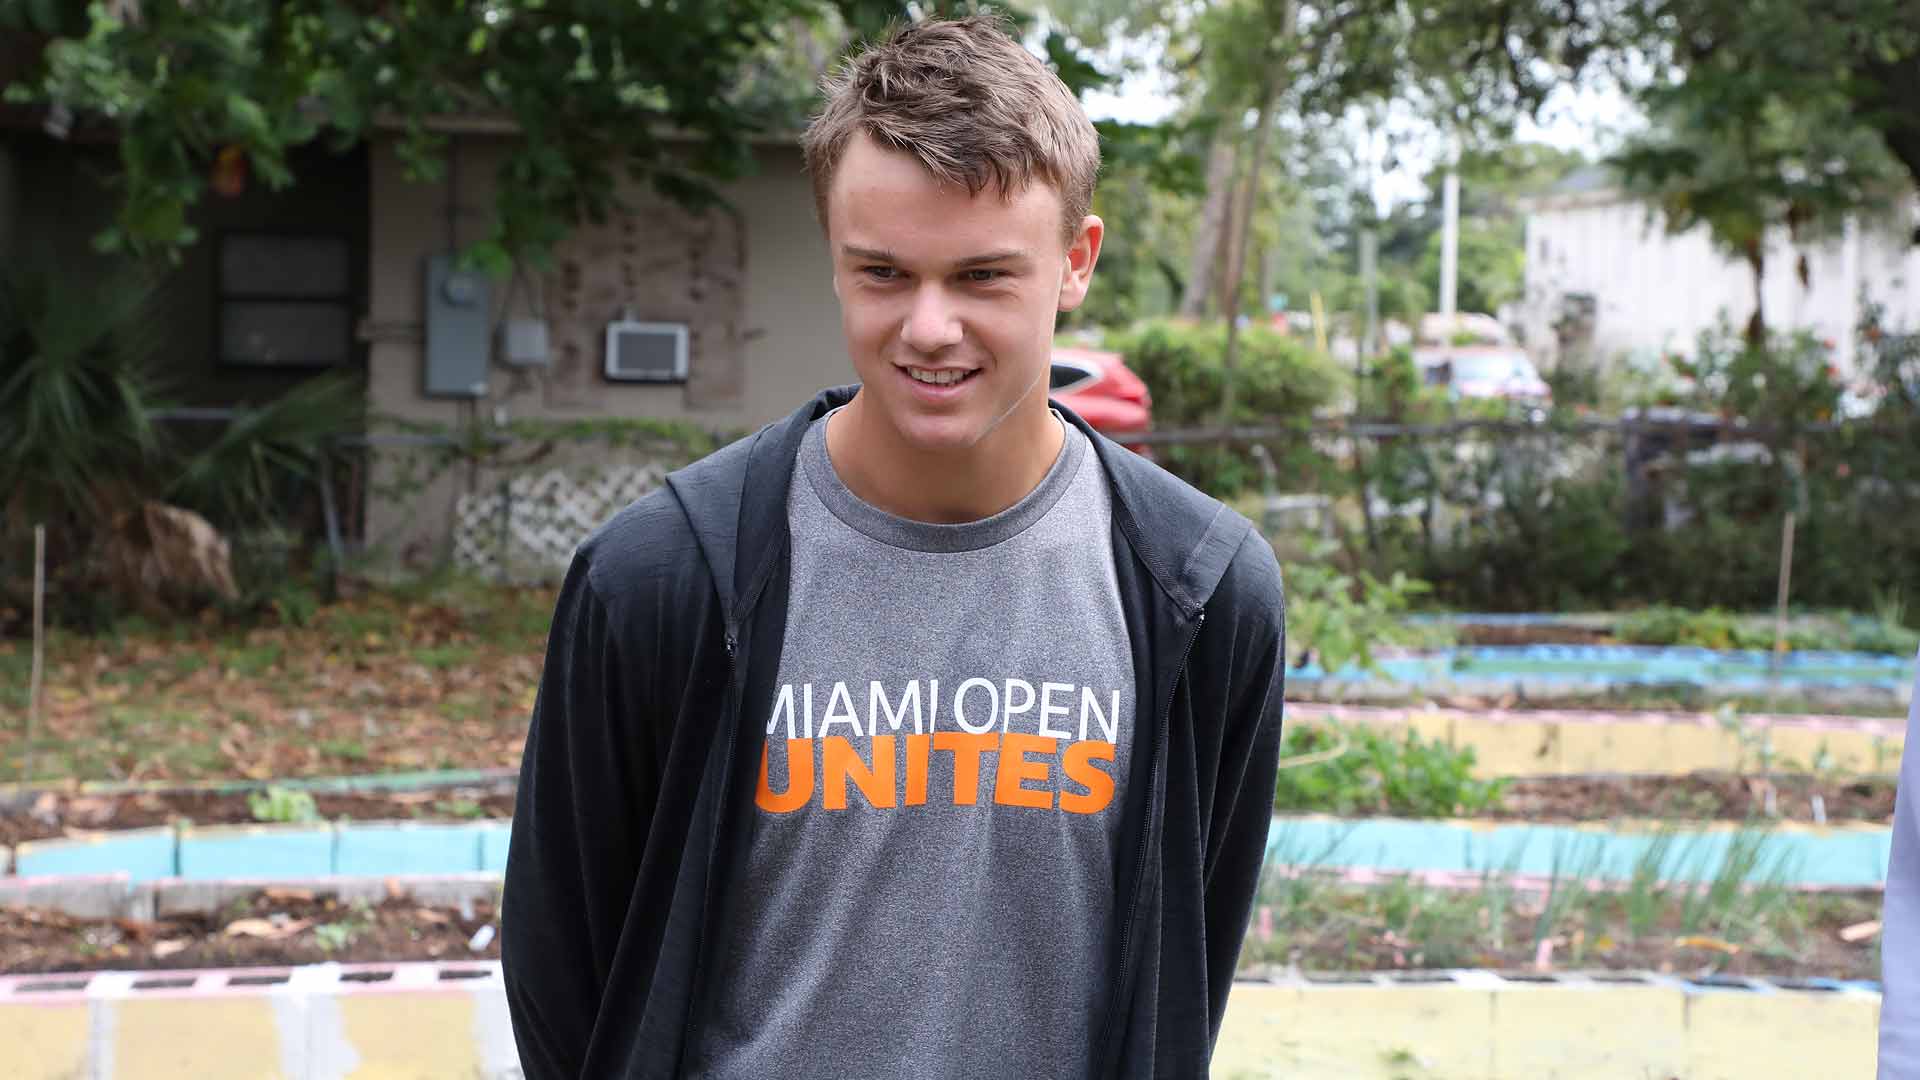 Holger Rune participated in the 2023 edition of 'Miami Open Unites' on Monday.